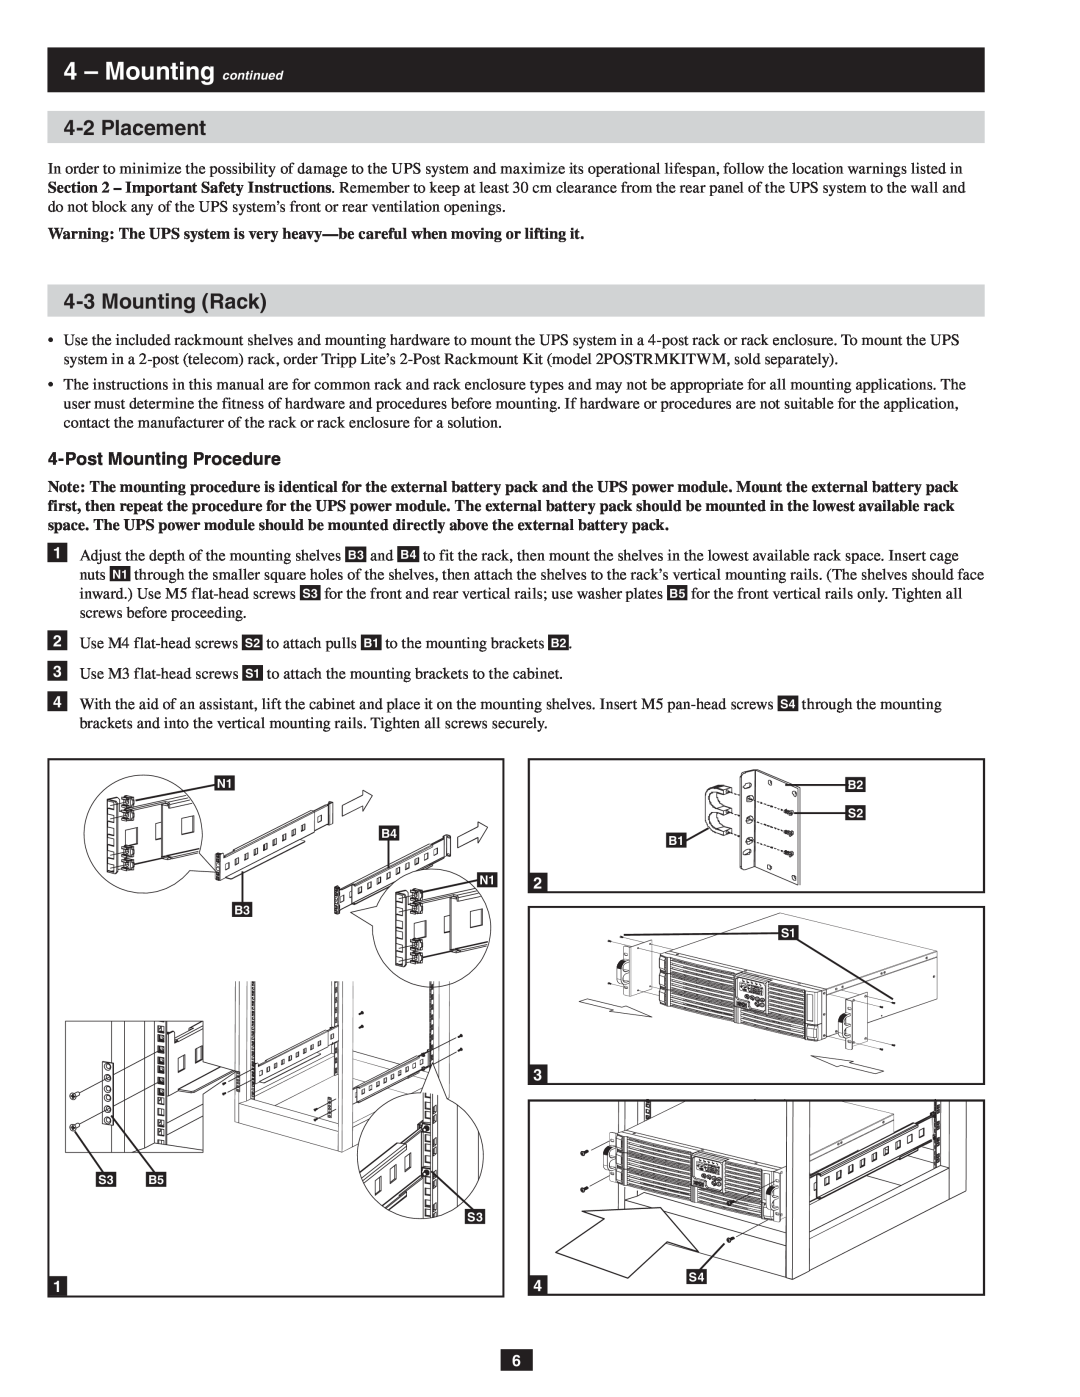 Tripp Lite SU10KRT3, SU10KRT1X owner manual Mounting continued, Placement, Mounting Rack 